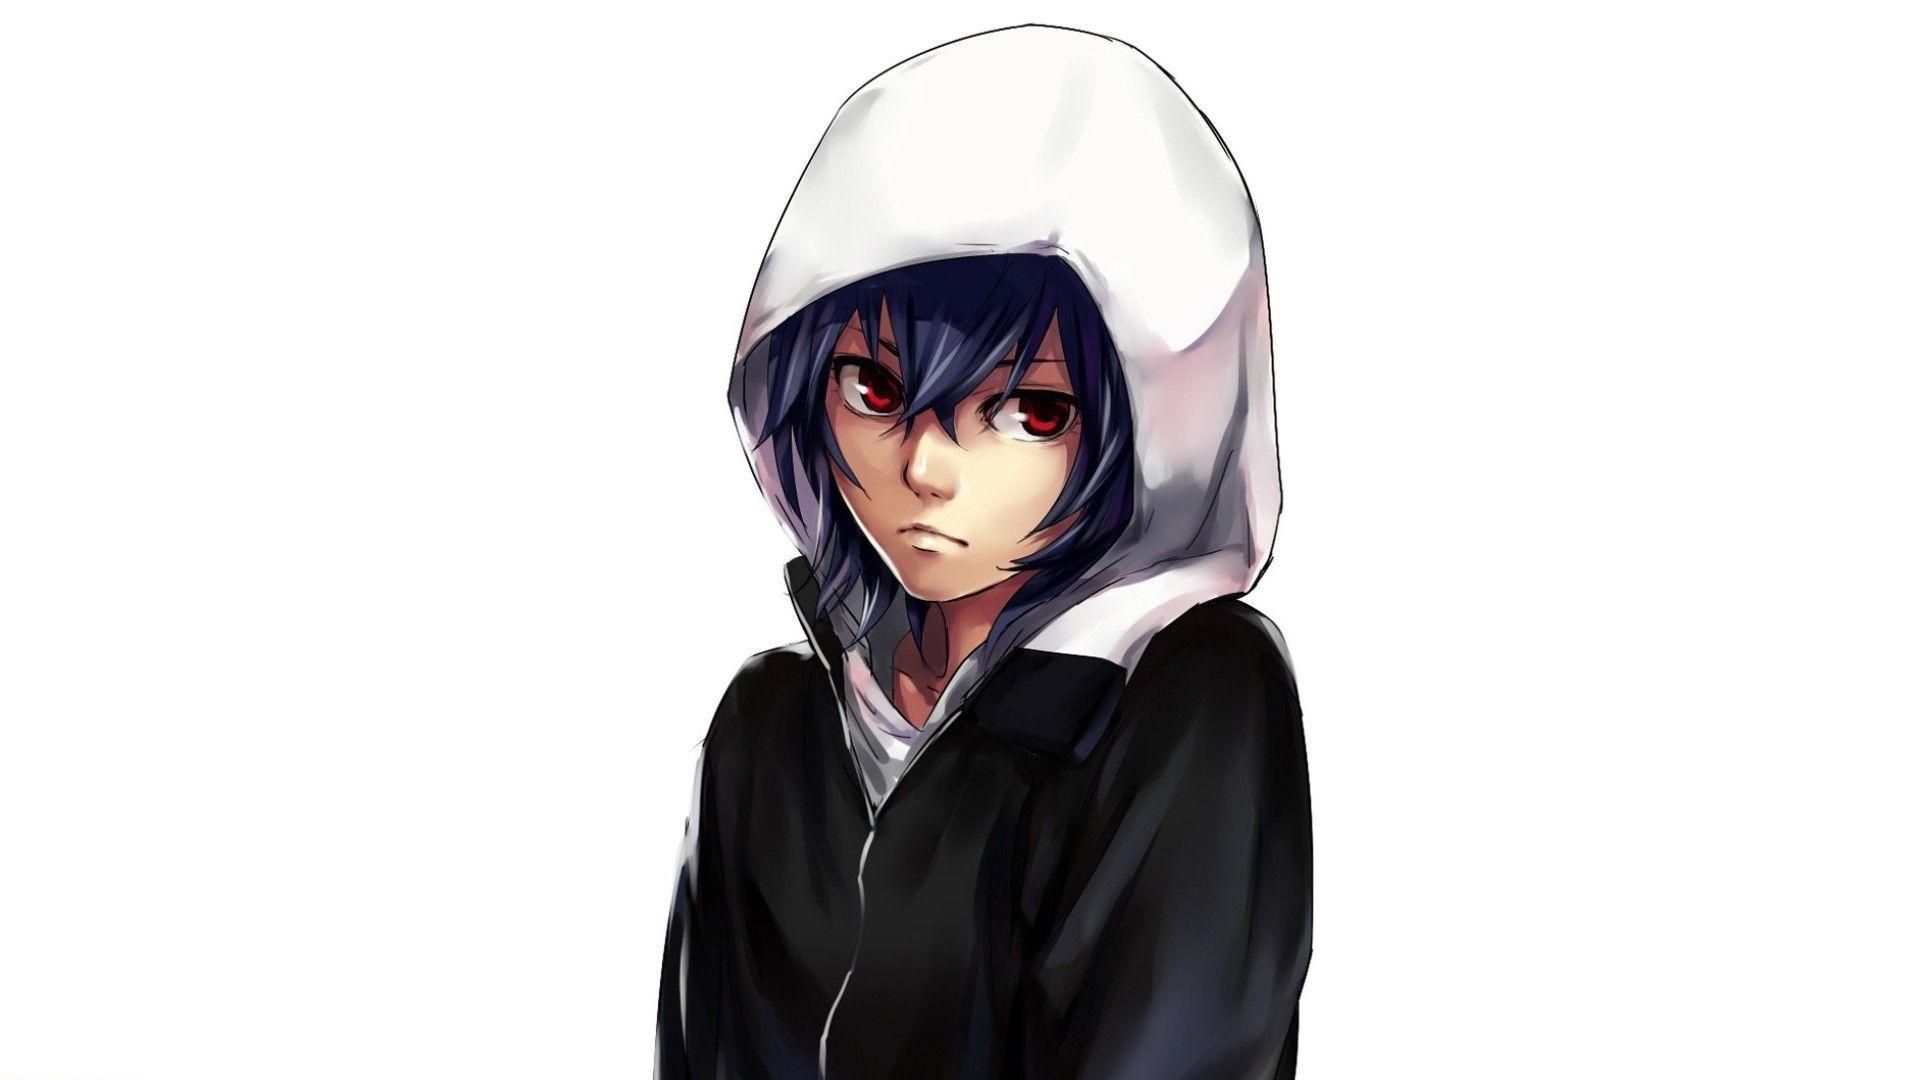 The Anime Girl In The Hoodie Has Very Nice Eyes Background, Good Anime  Profile Pictures, Profile, Animal Background Image And Wallpaper for Free  Download